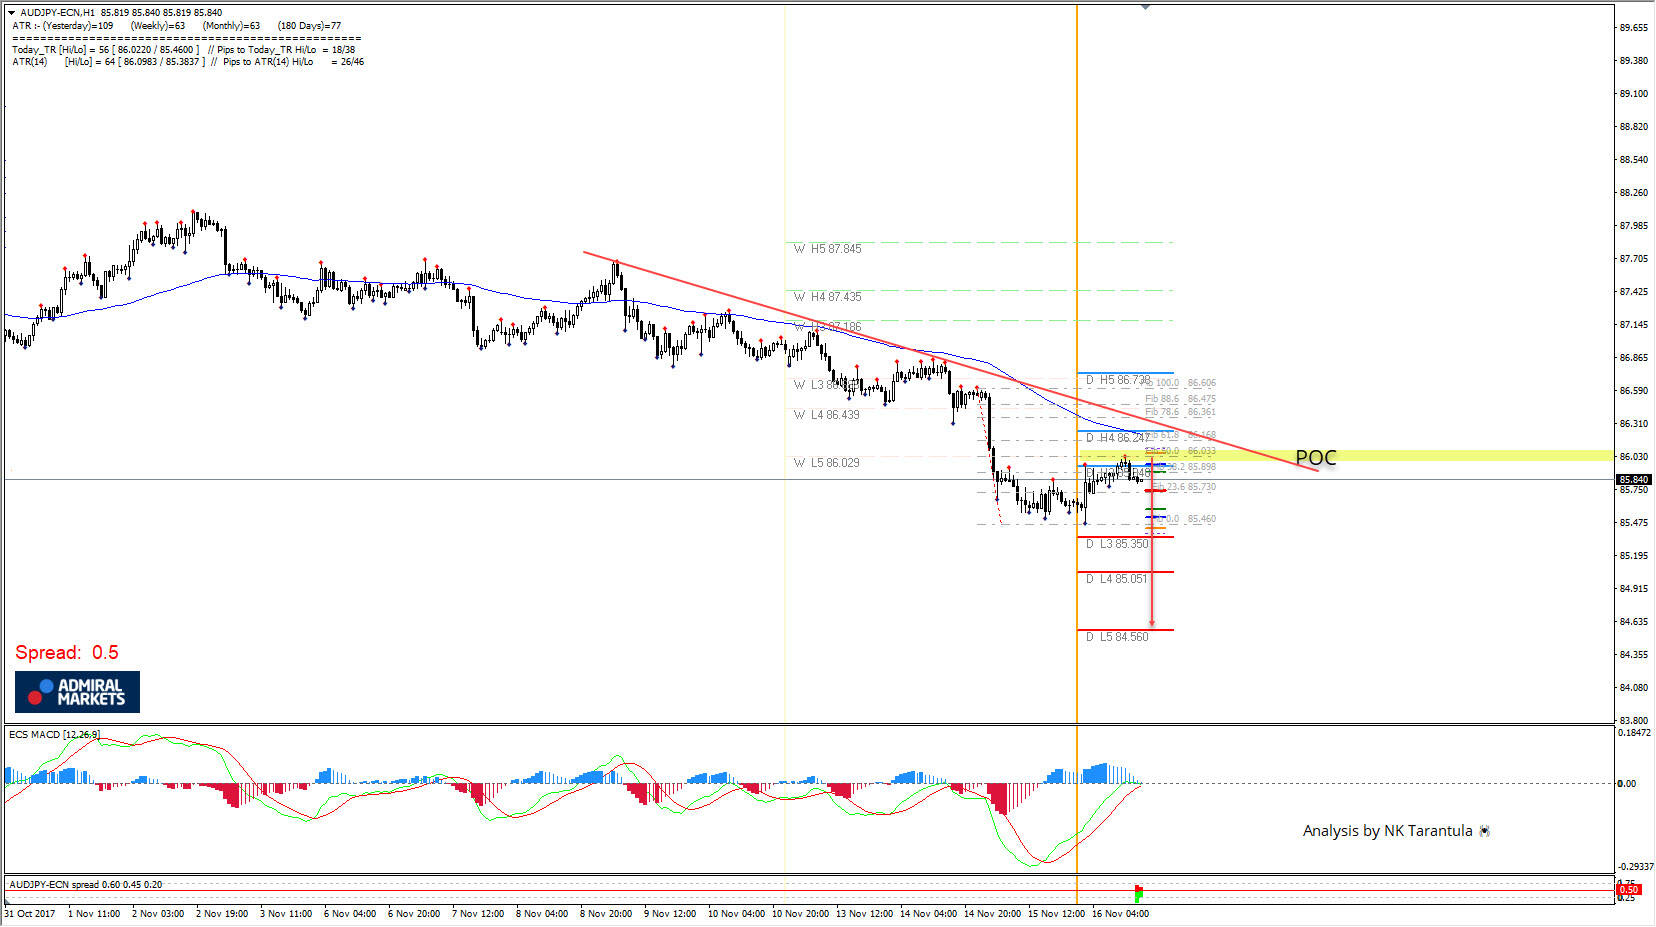 AUD/JPY Bearish Zig Zag Pattern Aiming for 85.35 if 86.25 holds